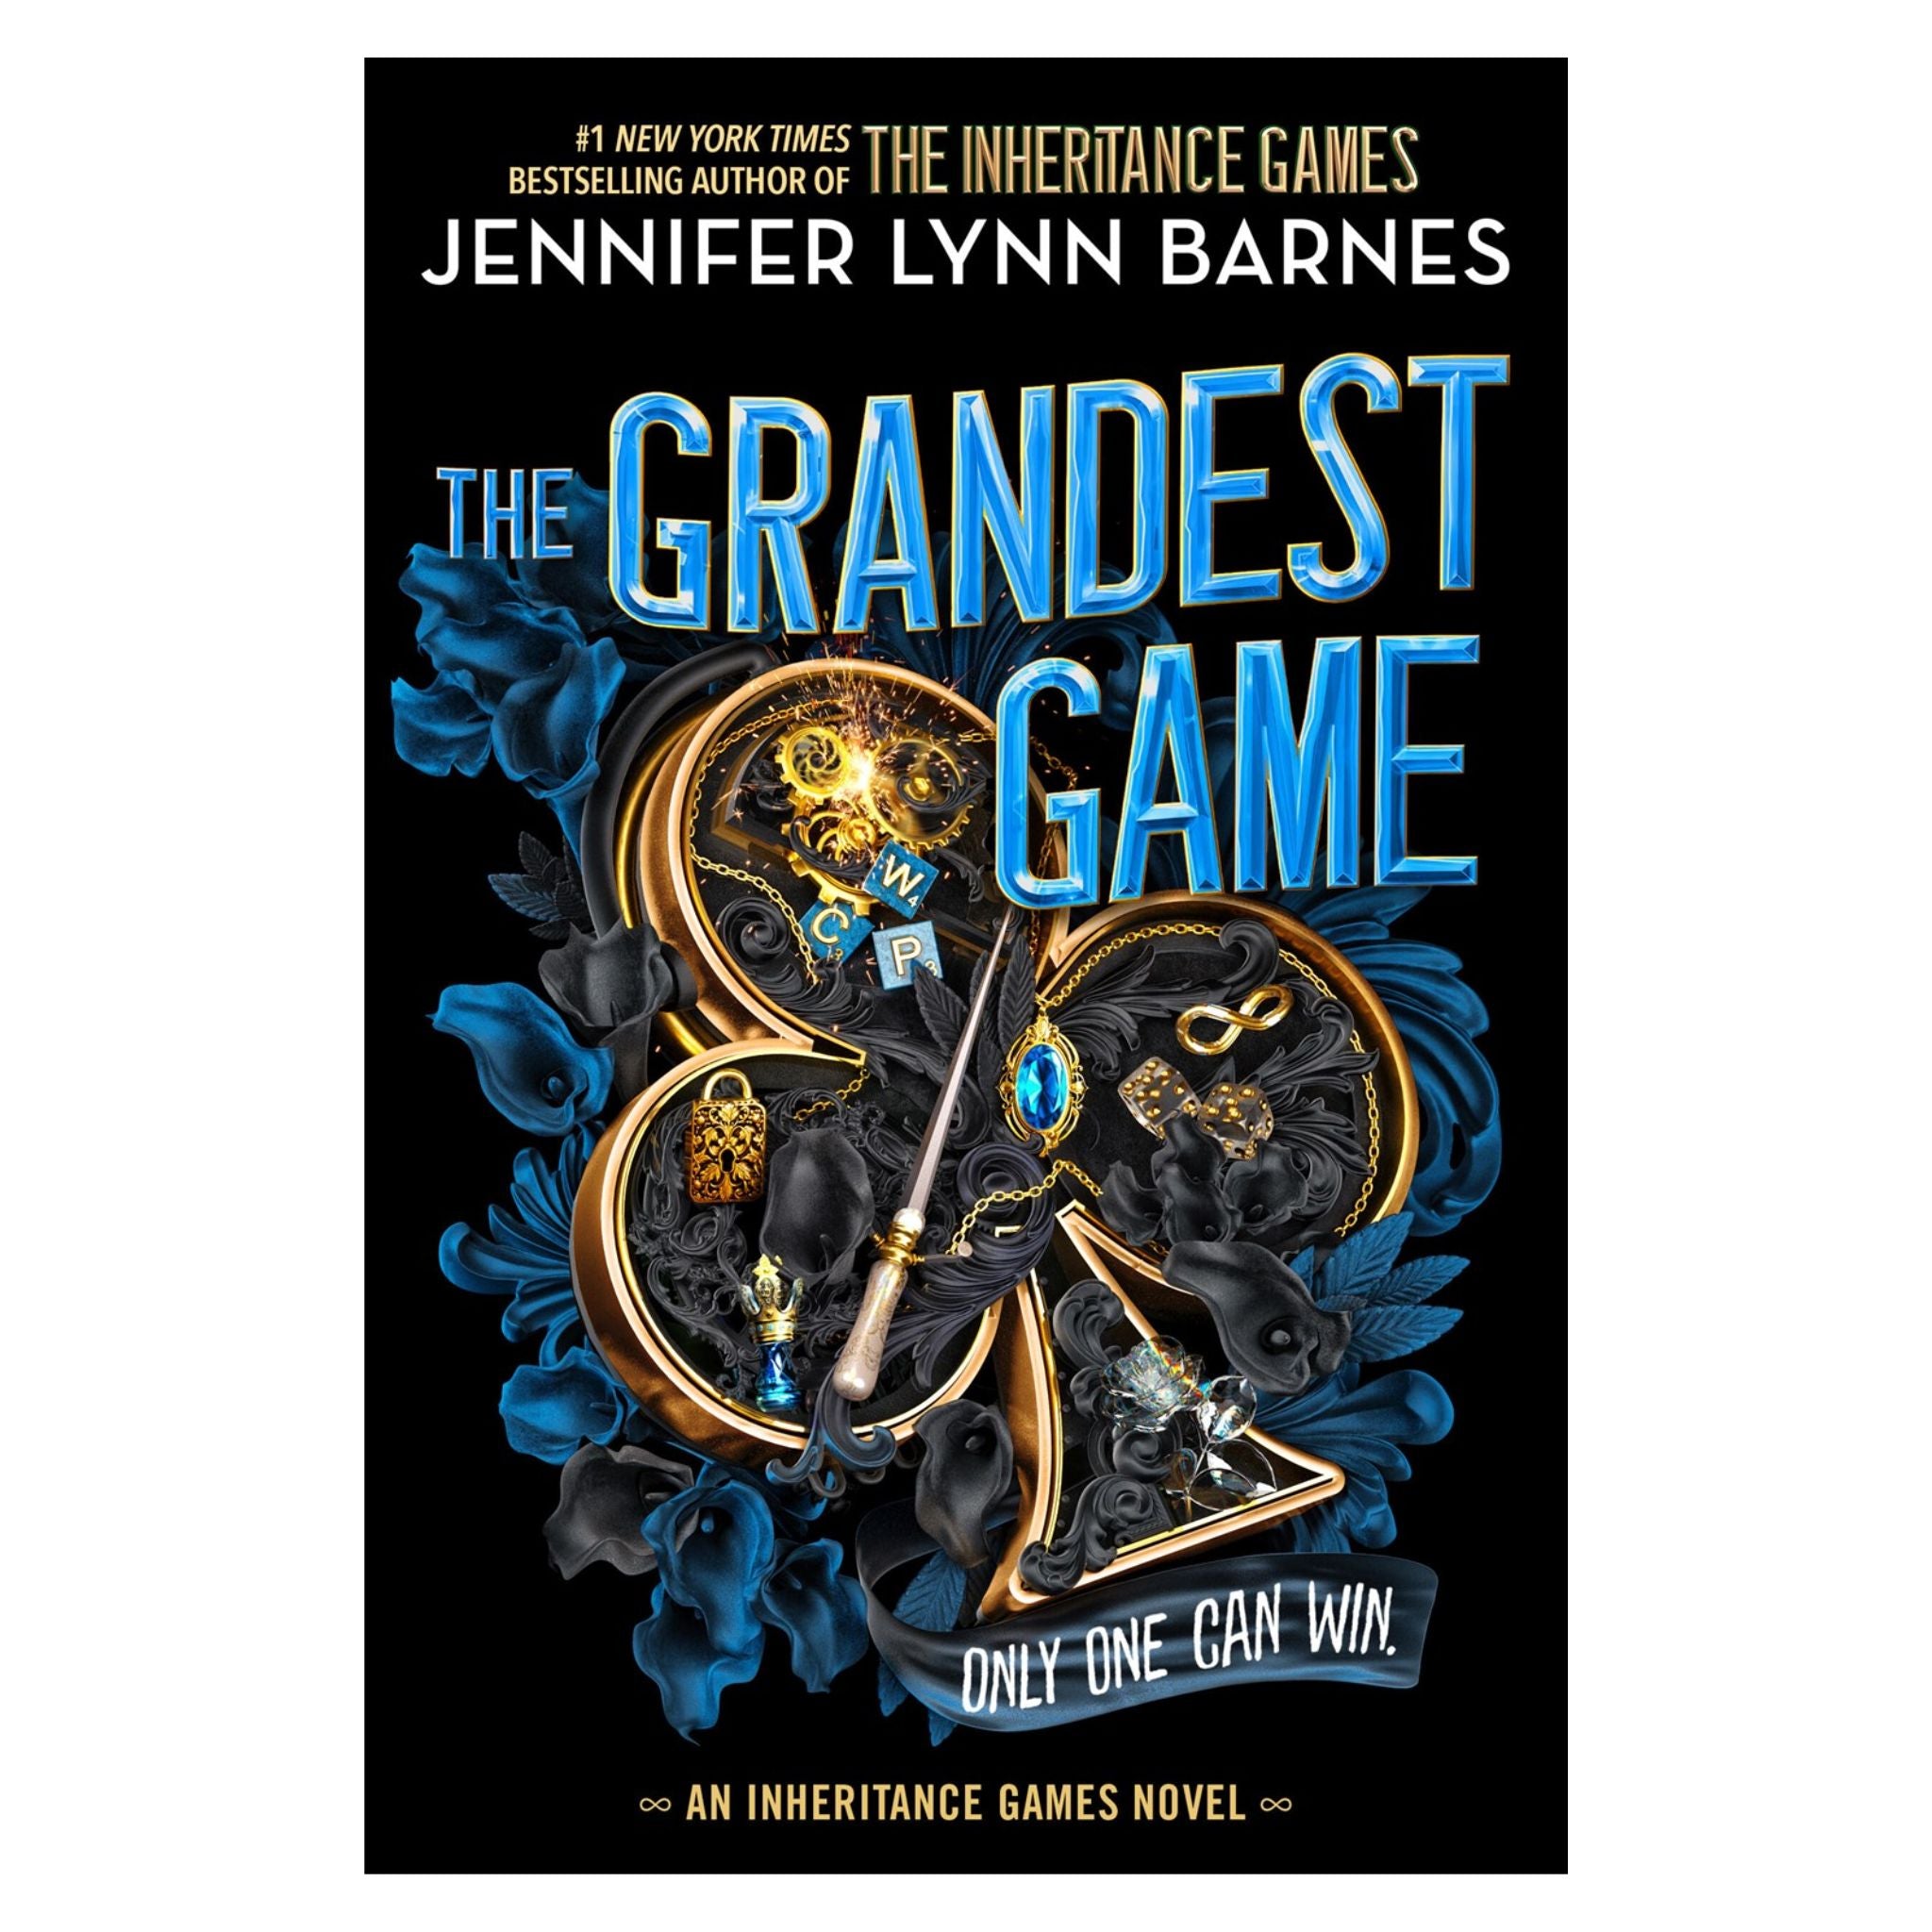 The Grandest Game: Volume 1 Pre-Order for July 30th